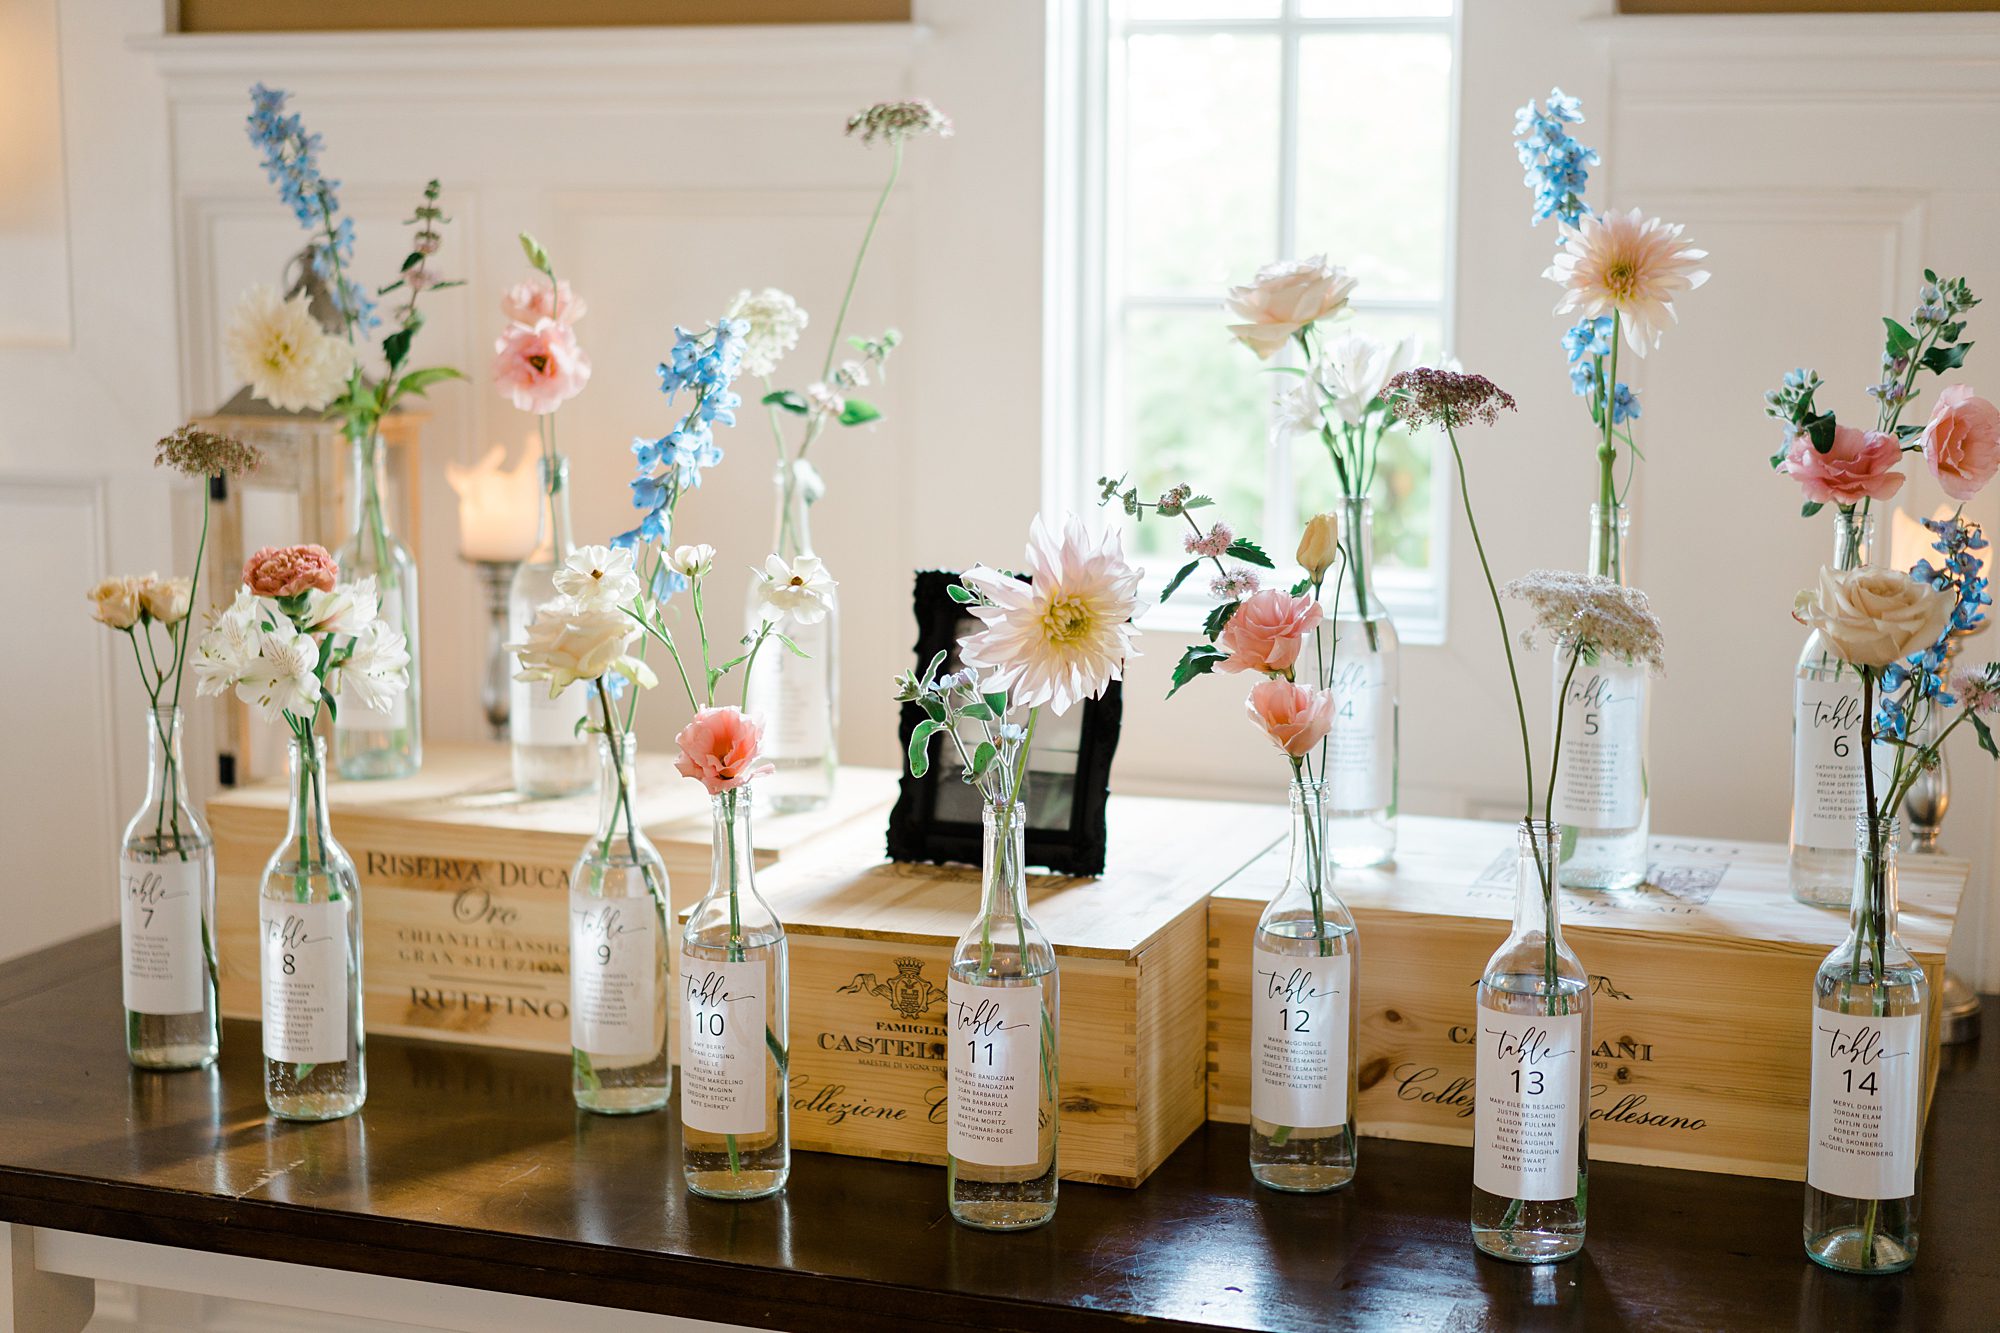 table identifiers with flowers in bottles